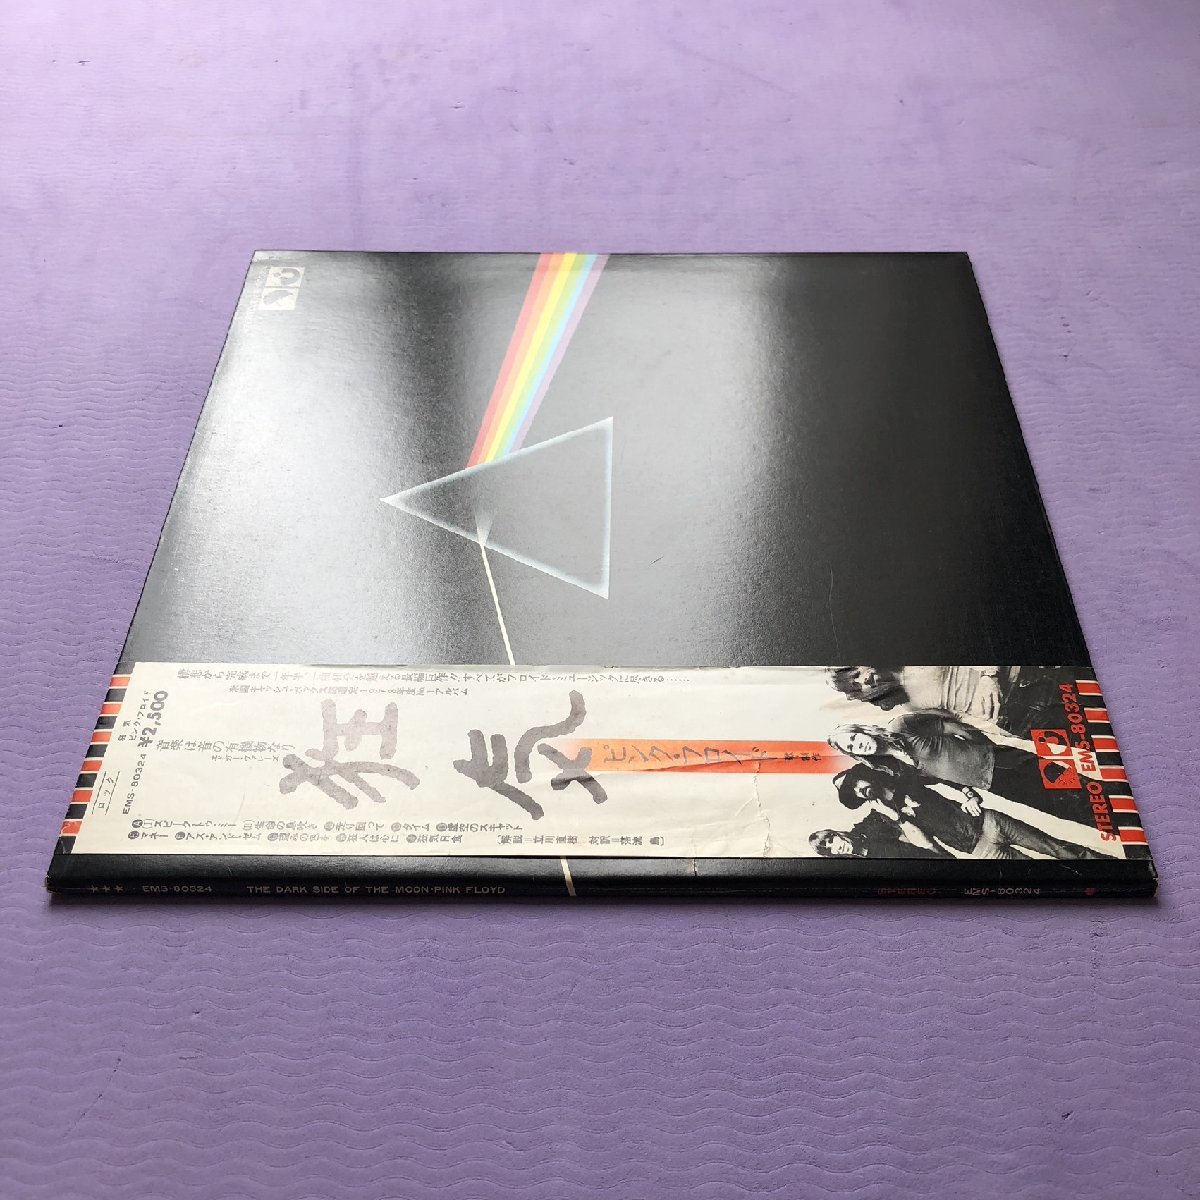  good jacket 1974 year domestic record pink * floyd Pink Floyd LP record madness The Dark Side Of The Moon name record with belt booklet attaching Roger Waters